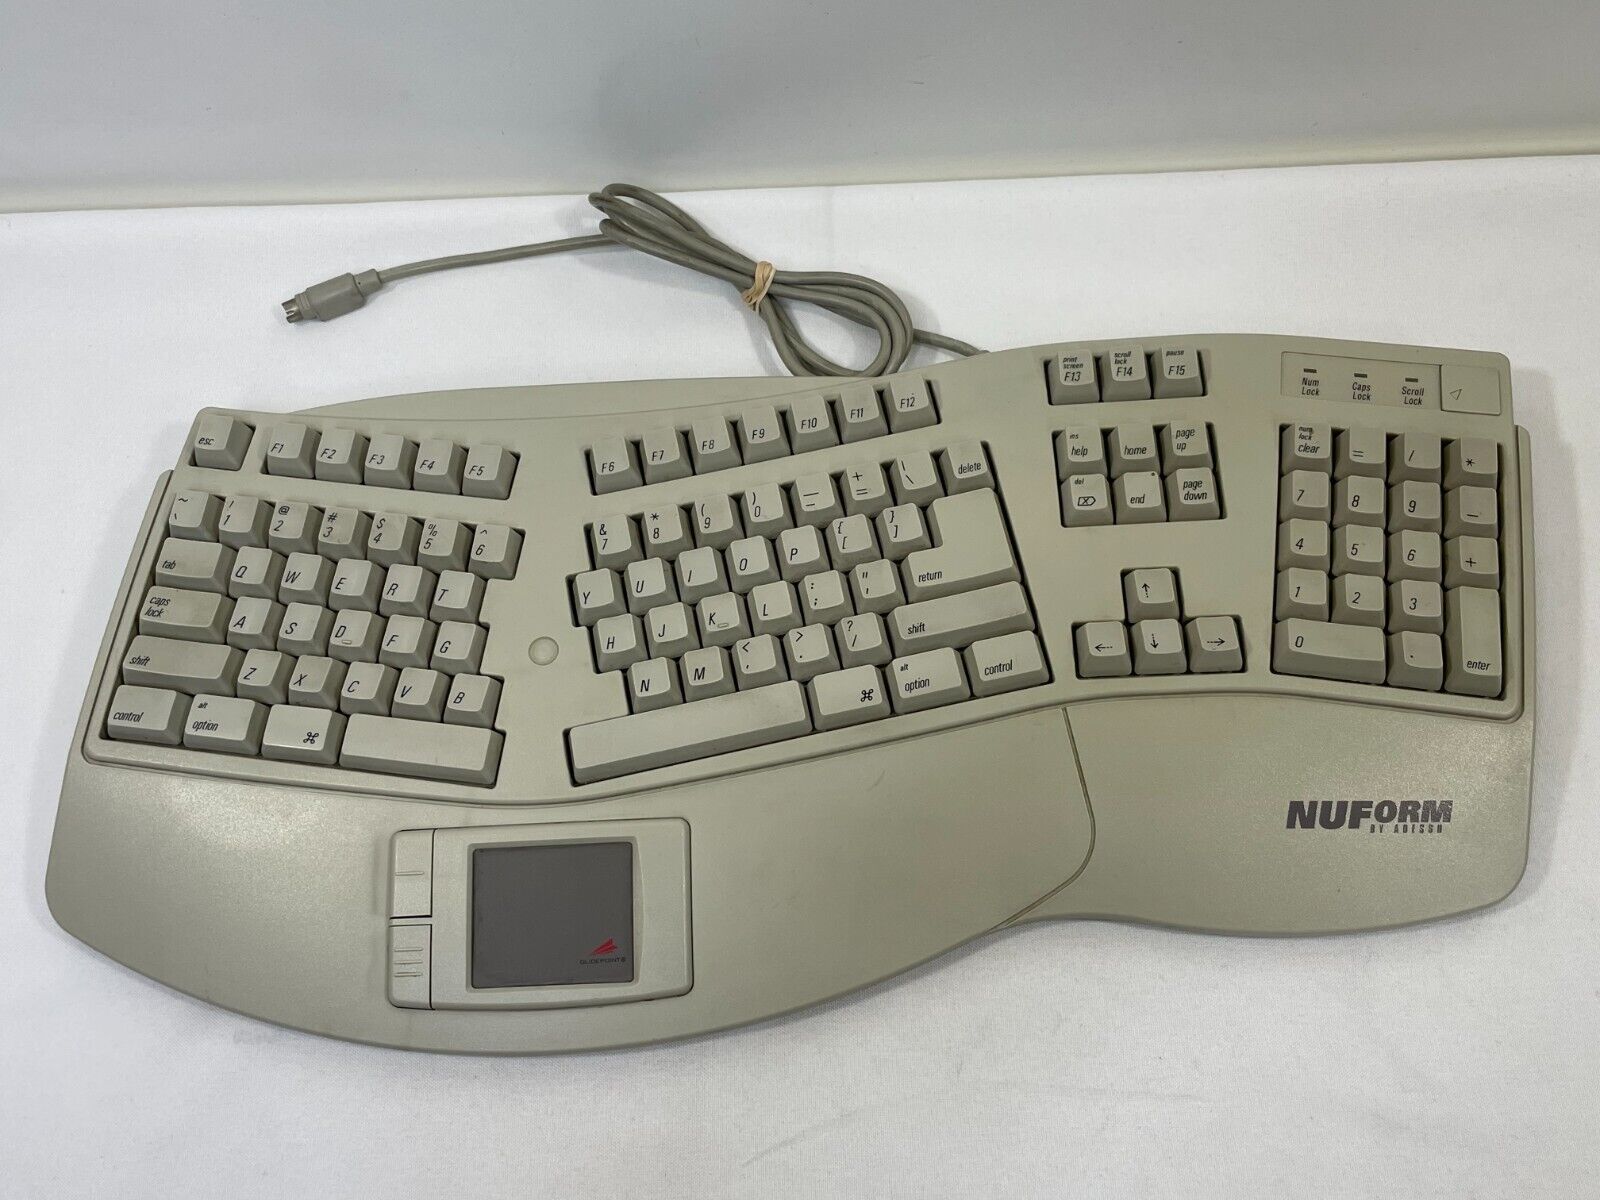 Vintage NuForm Extended Ergonomic Keyboard by Adesso AEK-503T Wired PS/2 PS2